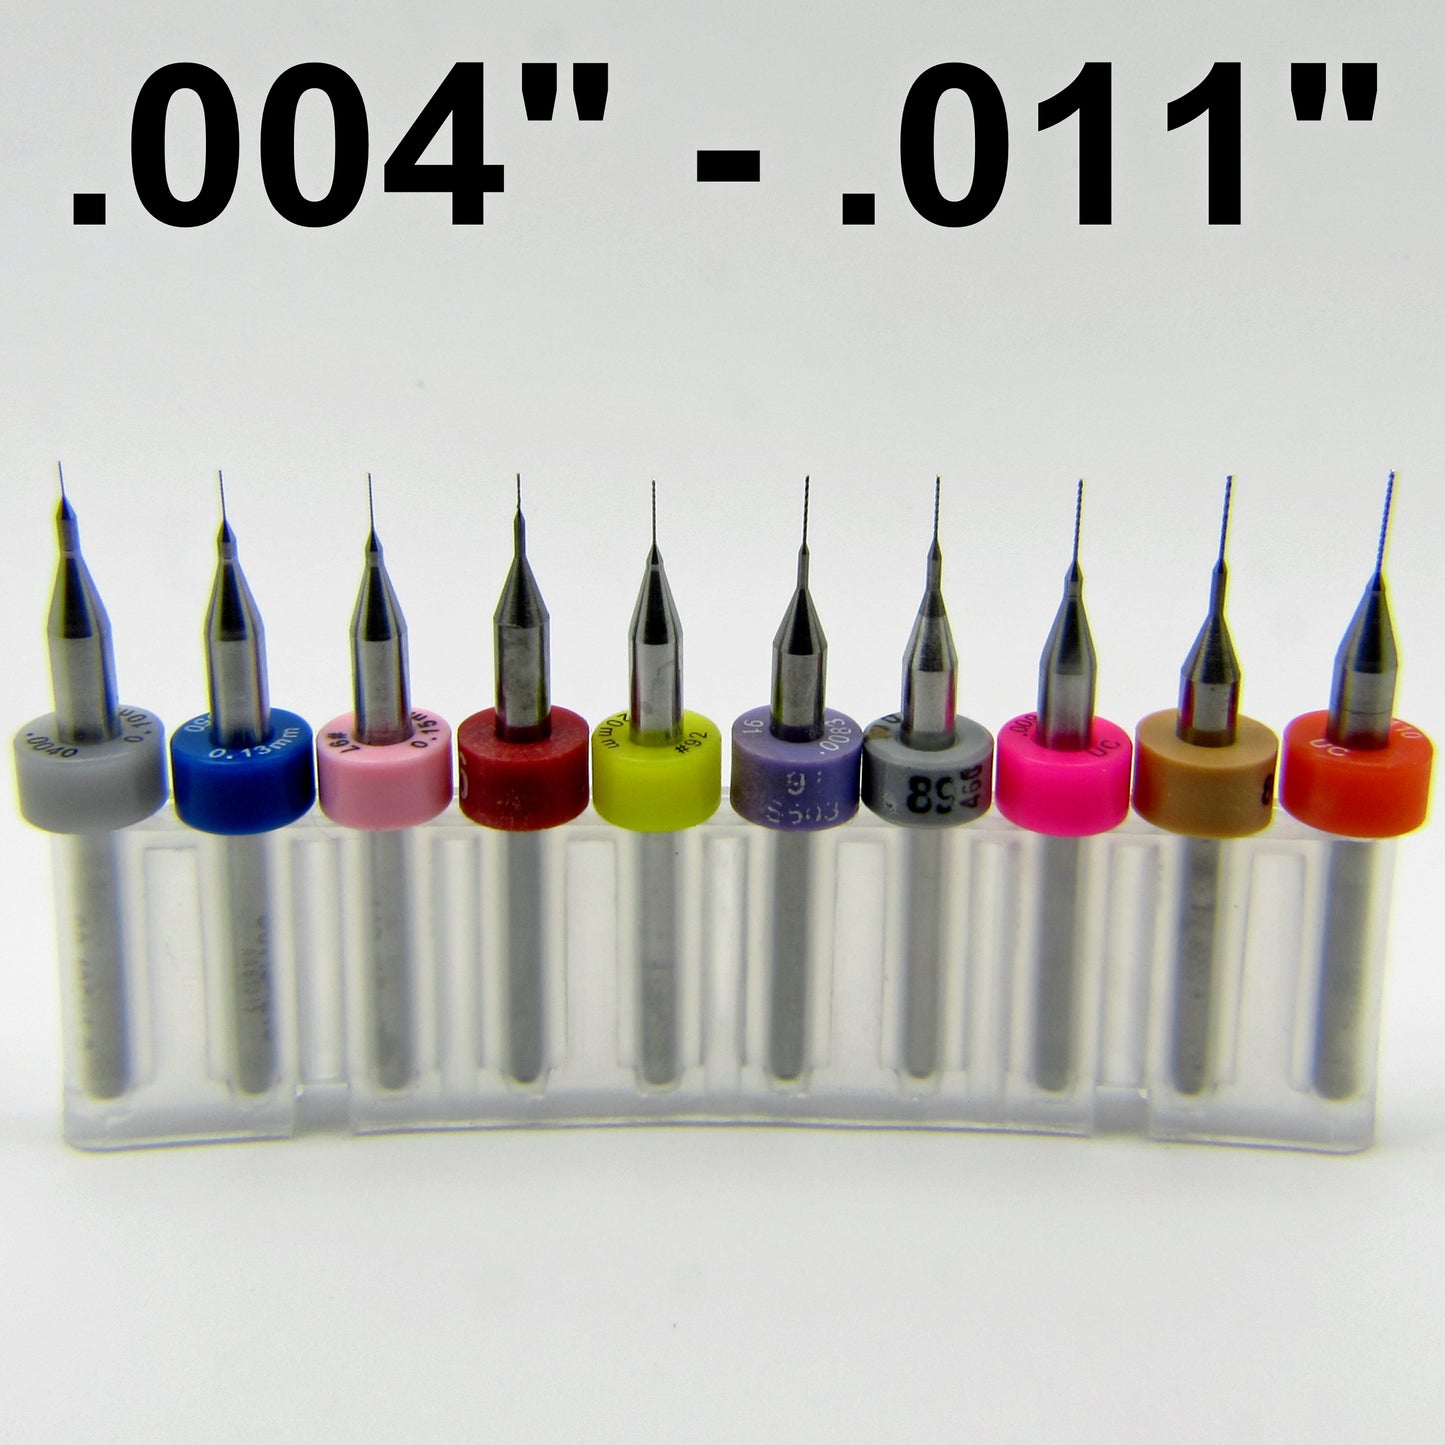 Incremental Size Solid Carbide Drill Set - Ten Pieces .004" - .011" ID00